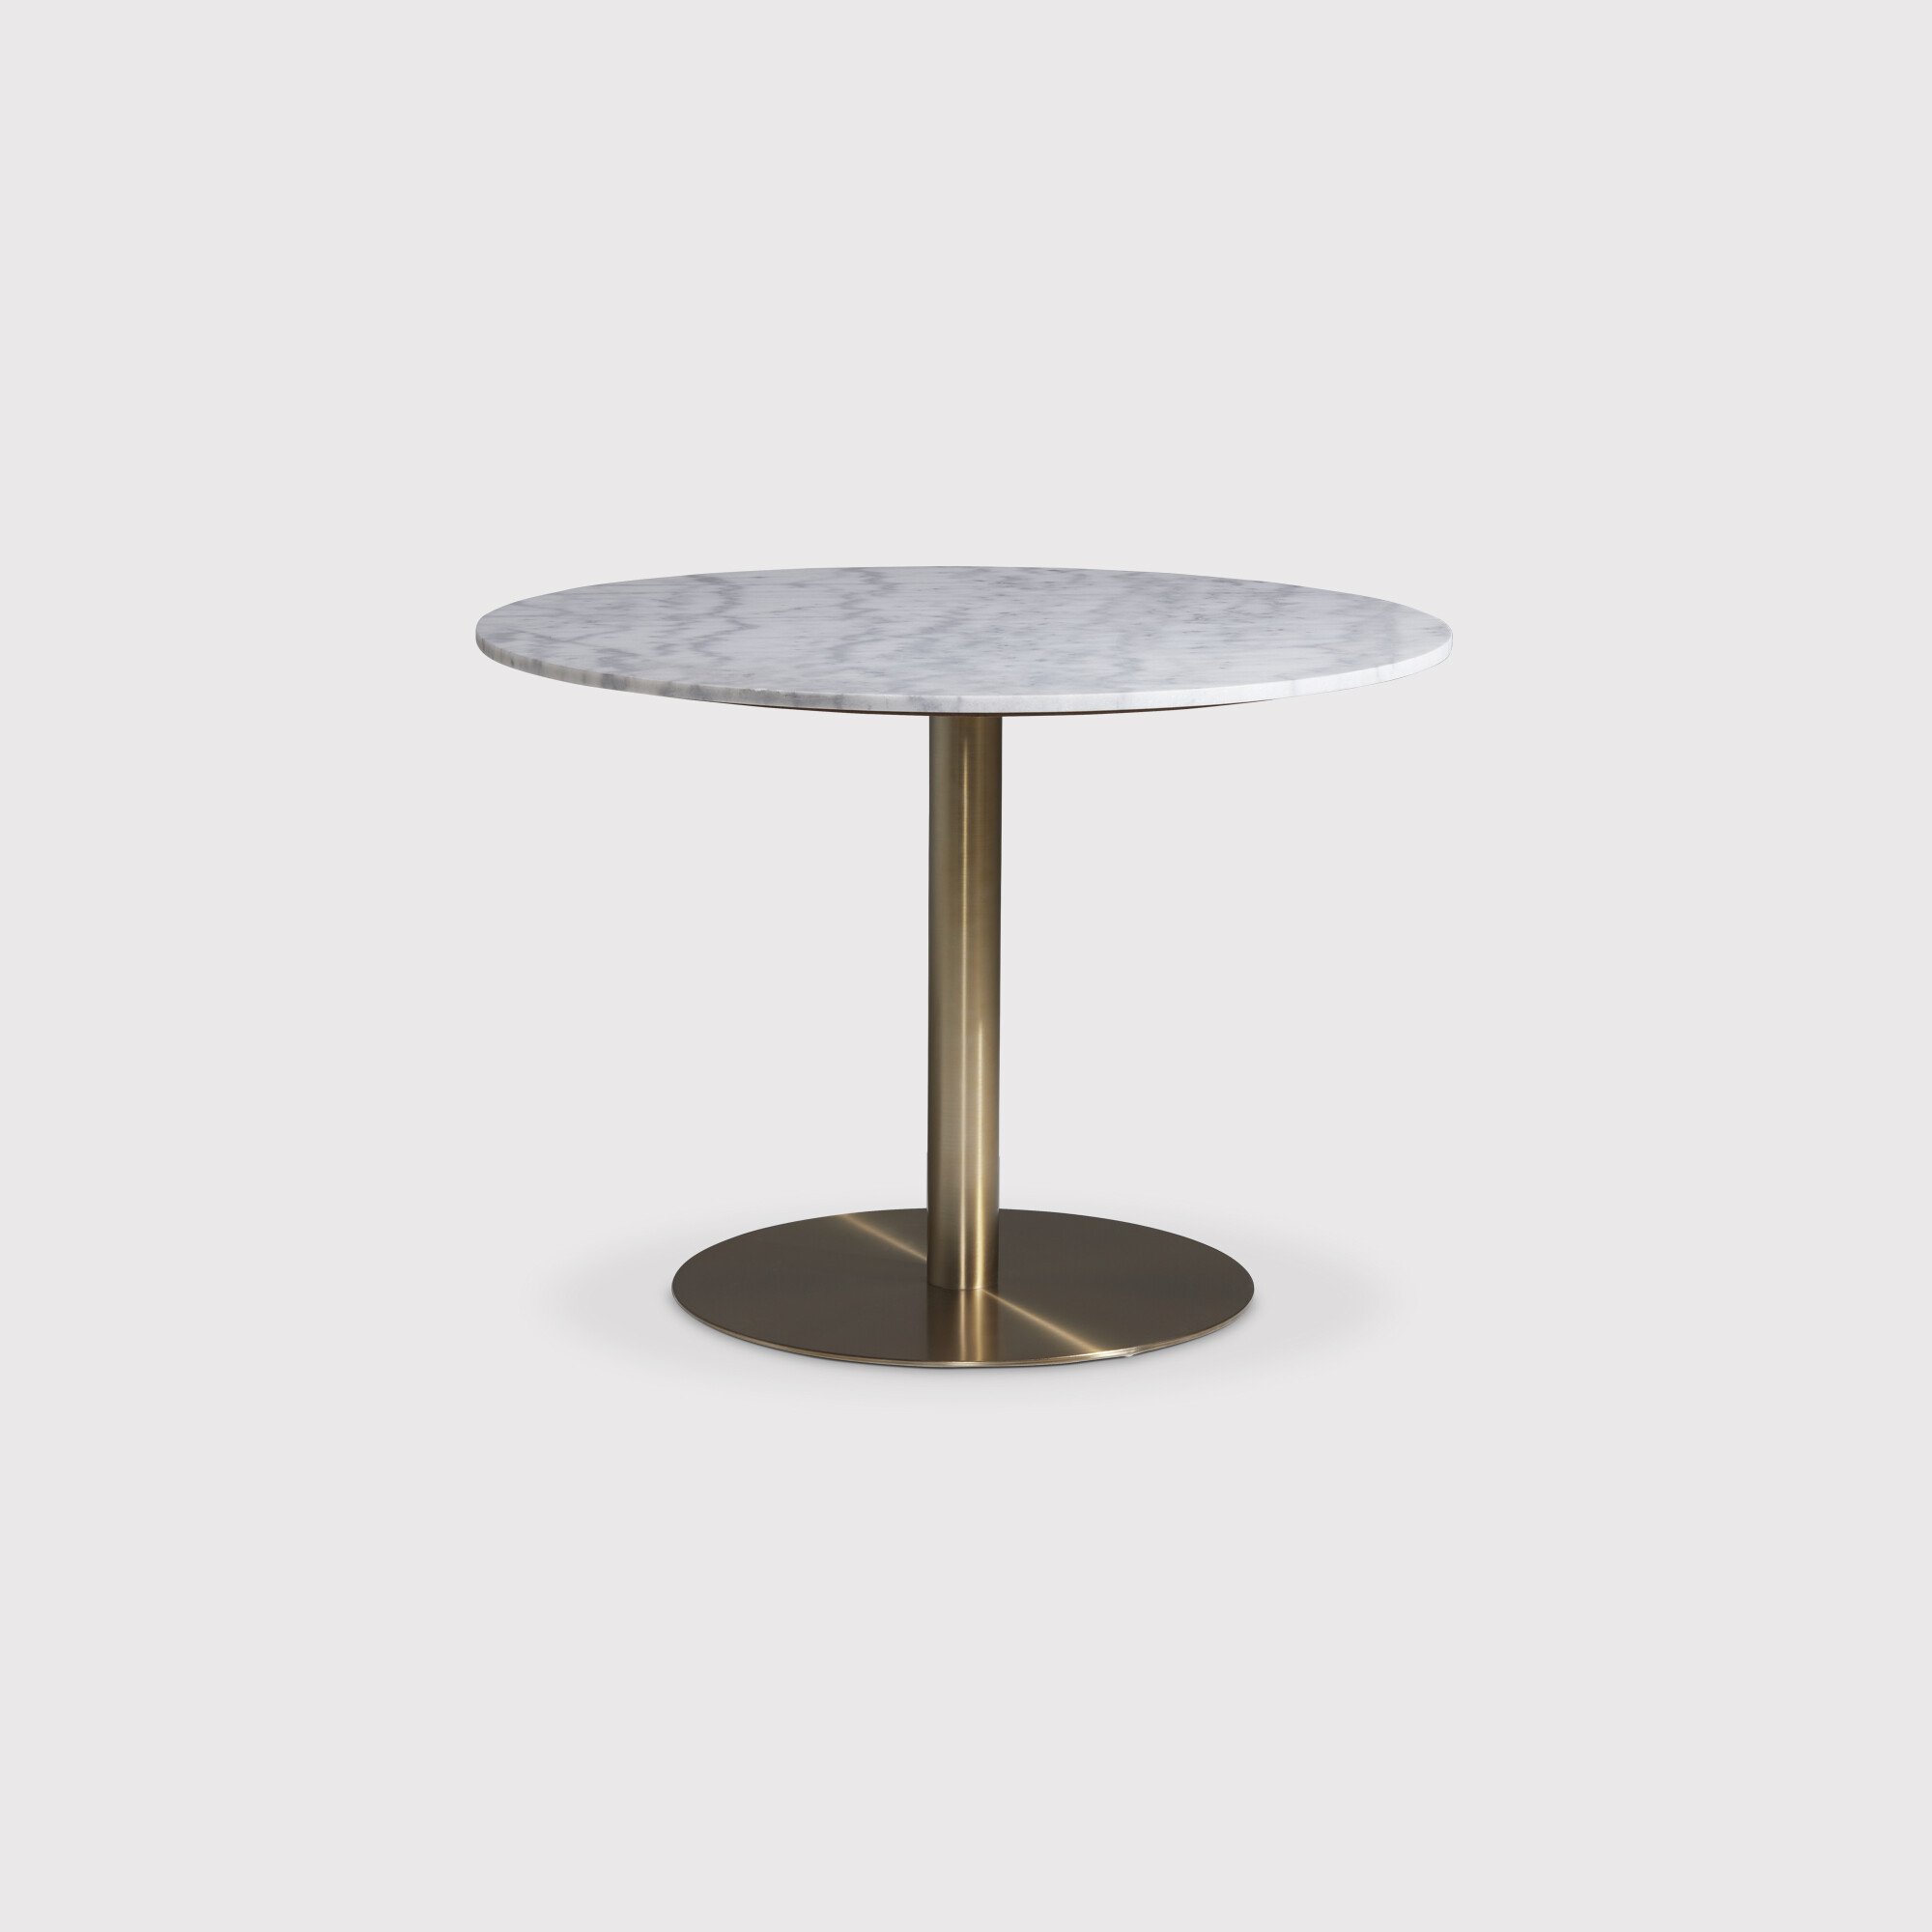 Apollo Dining Table, Round, White Marble | Barker & Stonehouse